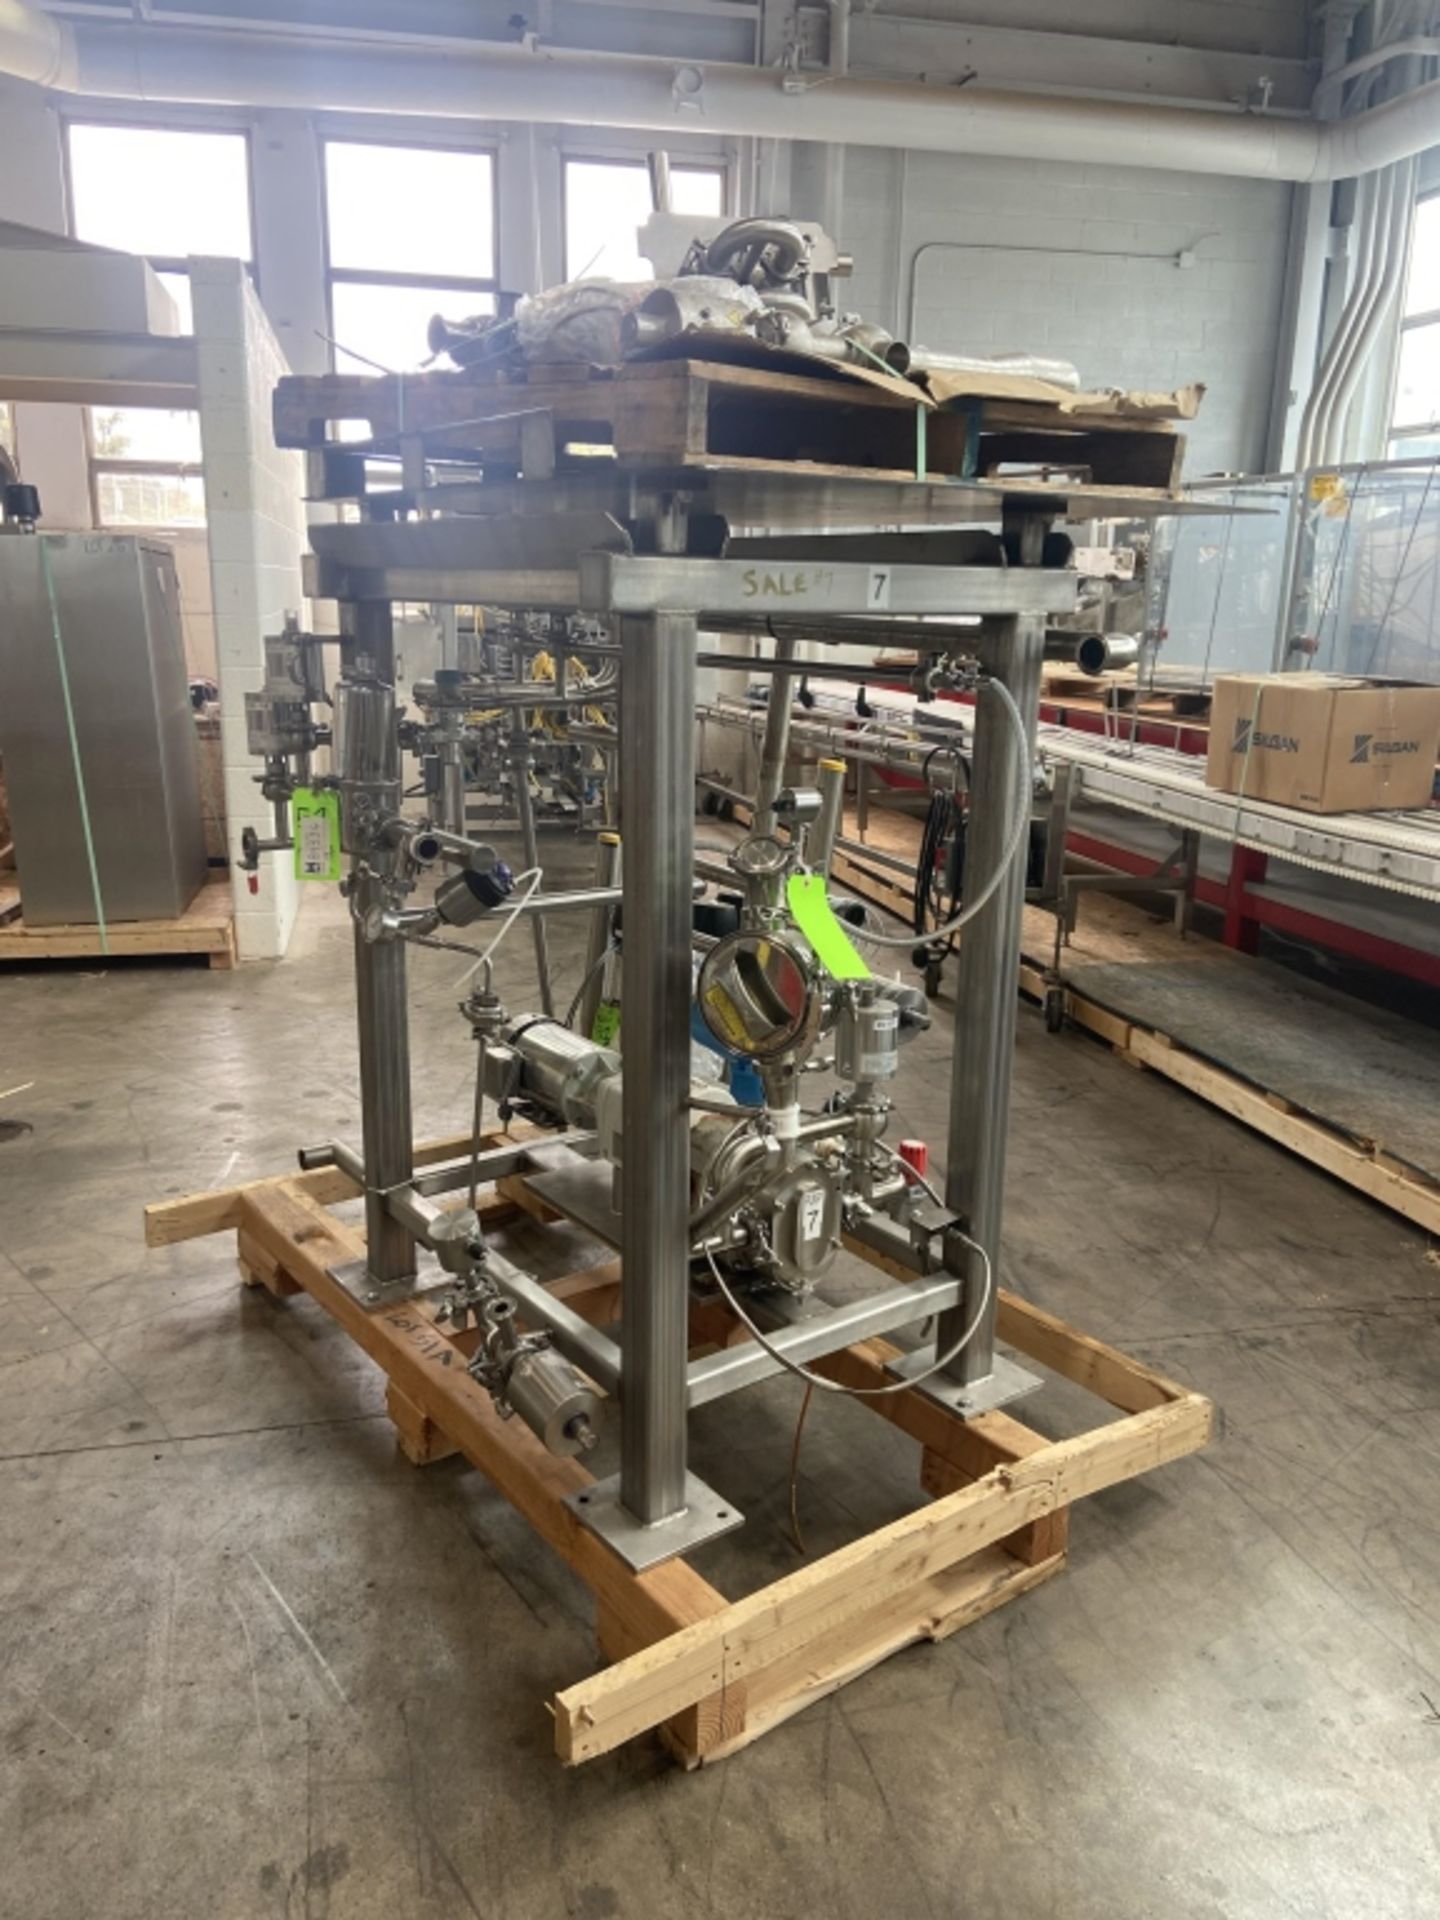 SINGLE FRUIT SKID, OPERATED WITH MODERN PACKAGING CUP FILLER LOT 50, INCLUDES FRISTAM POSITIVE - Image 12 of 21